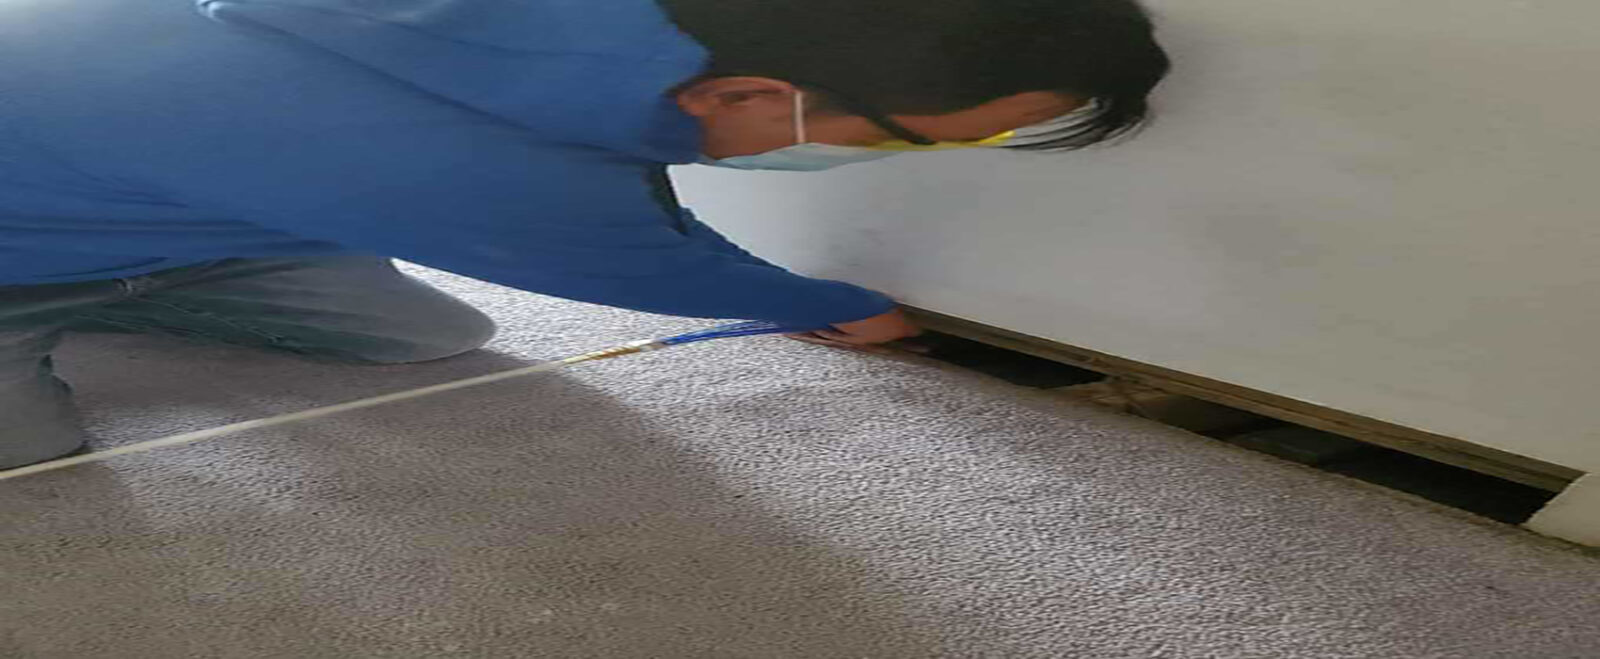 Furnace and Duct Cleaning Calgary